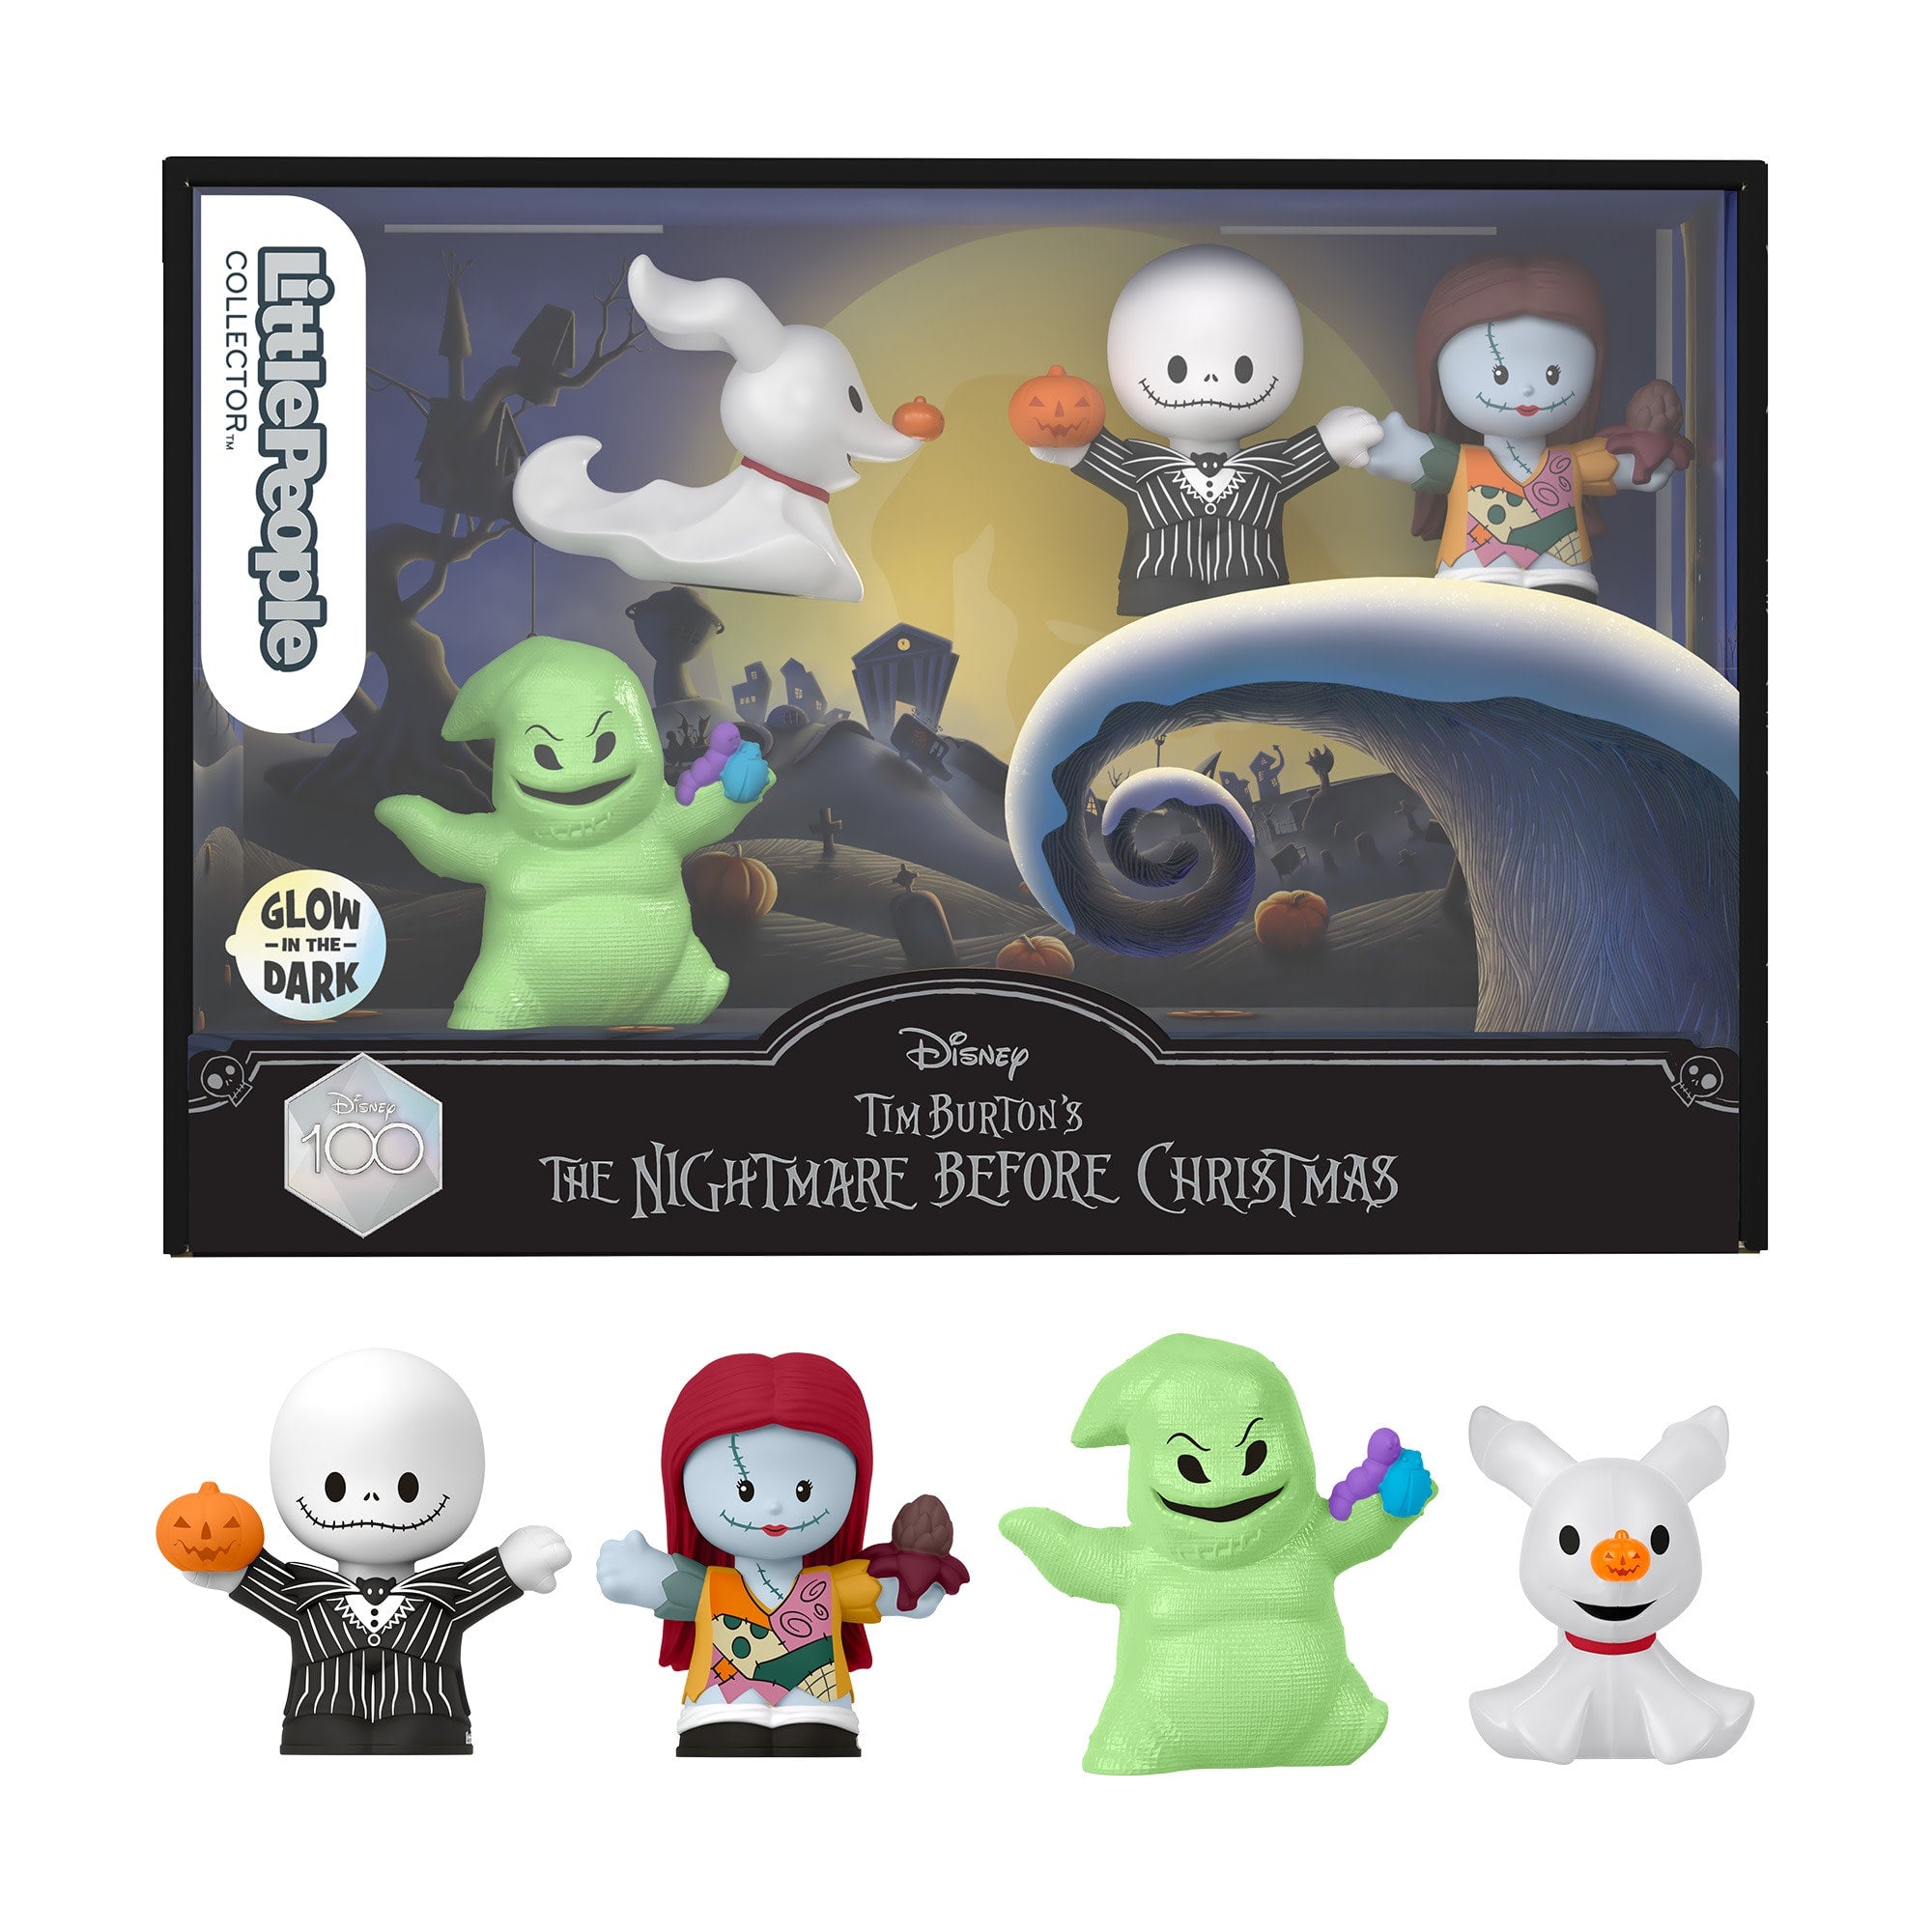 The Nightmare Before Christmas ULTIMATES! Set of 3 Figures